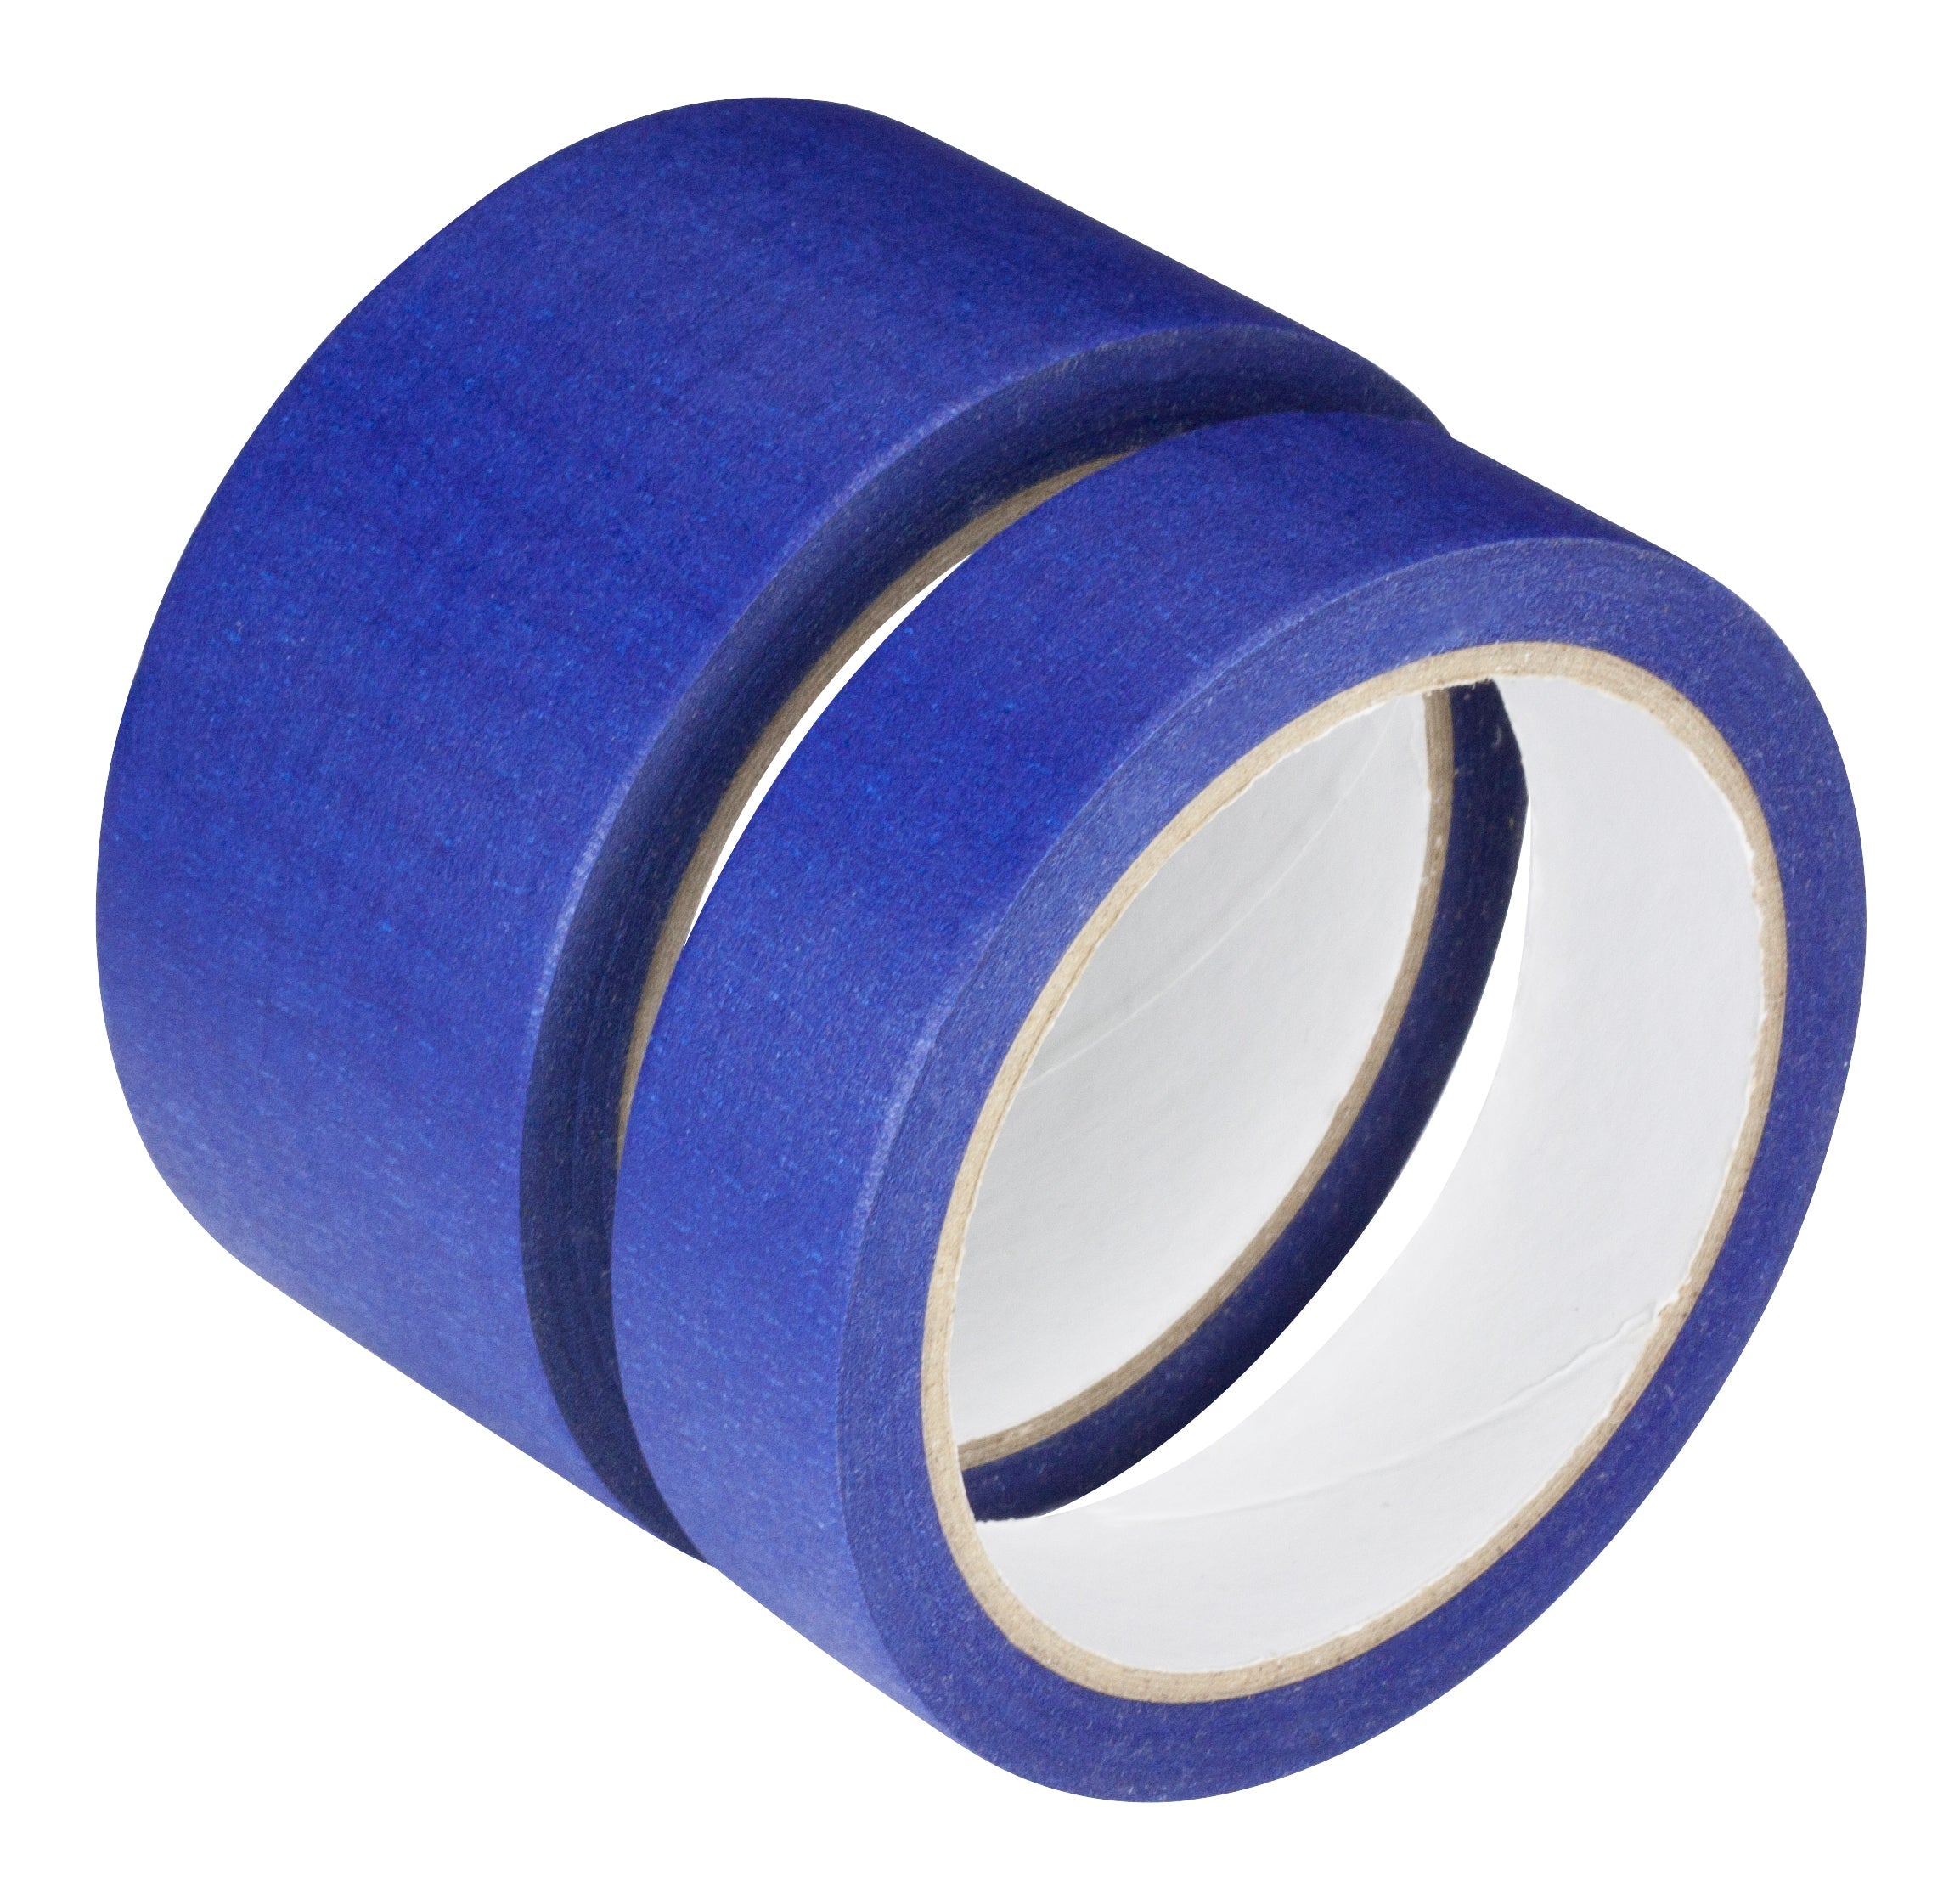 Masking Tape 50mm x 50m (Premium Quality) 0.12mm Thickness BLUE, UV Rated - Per Pack